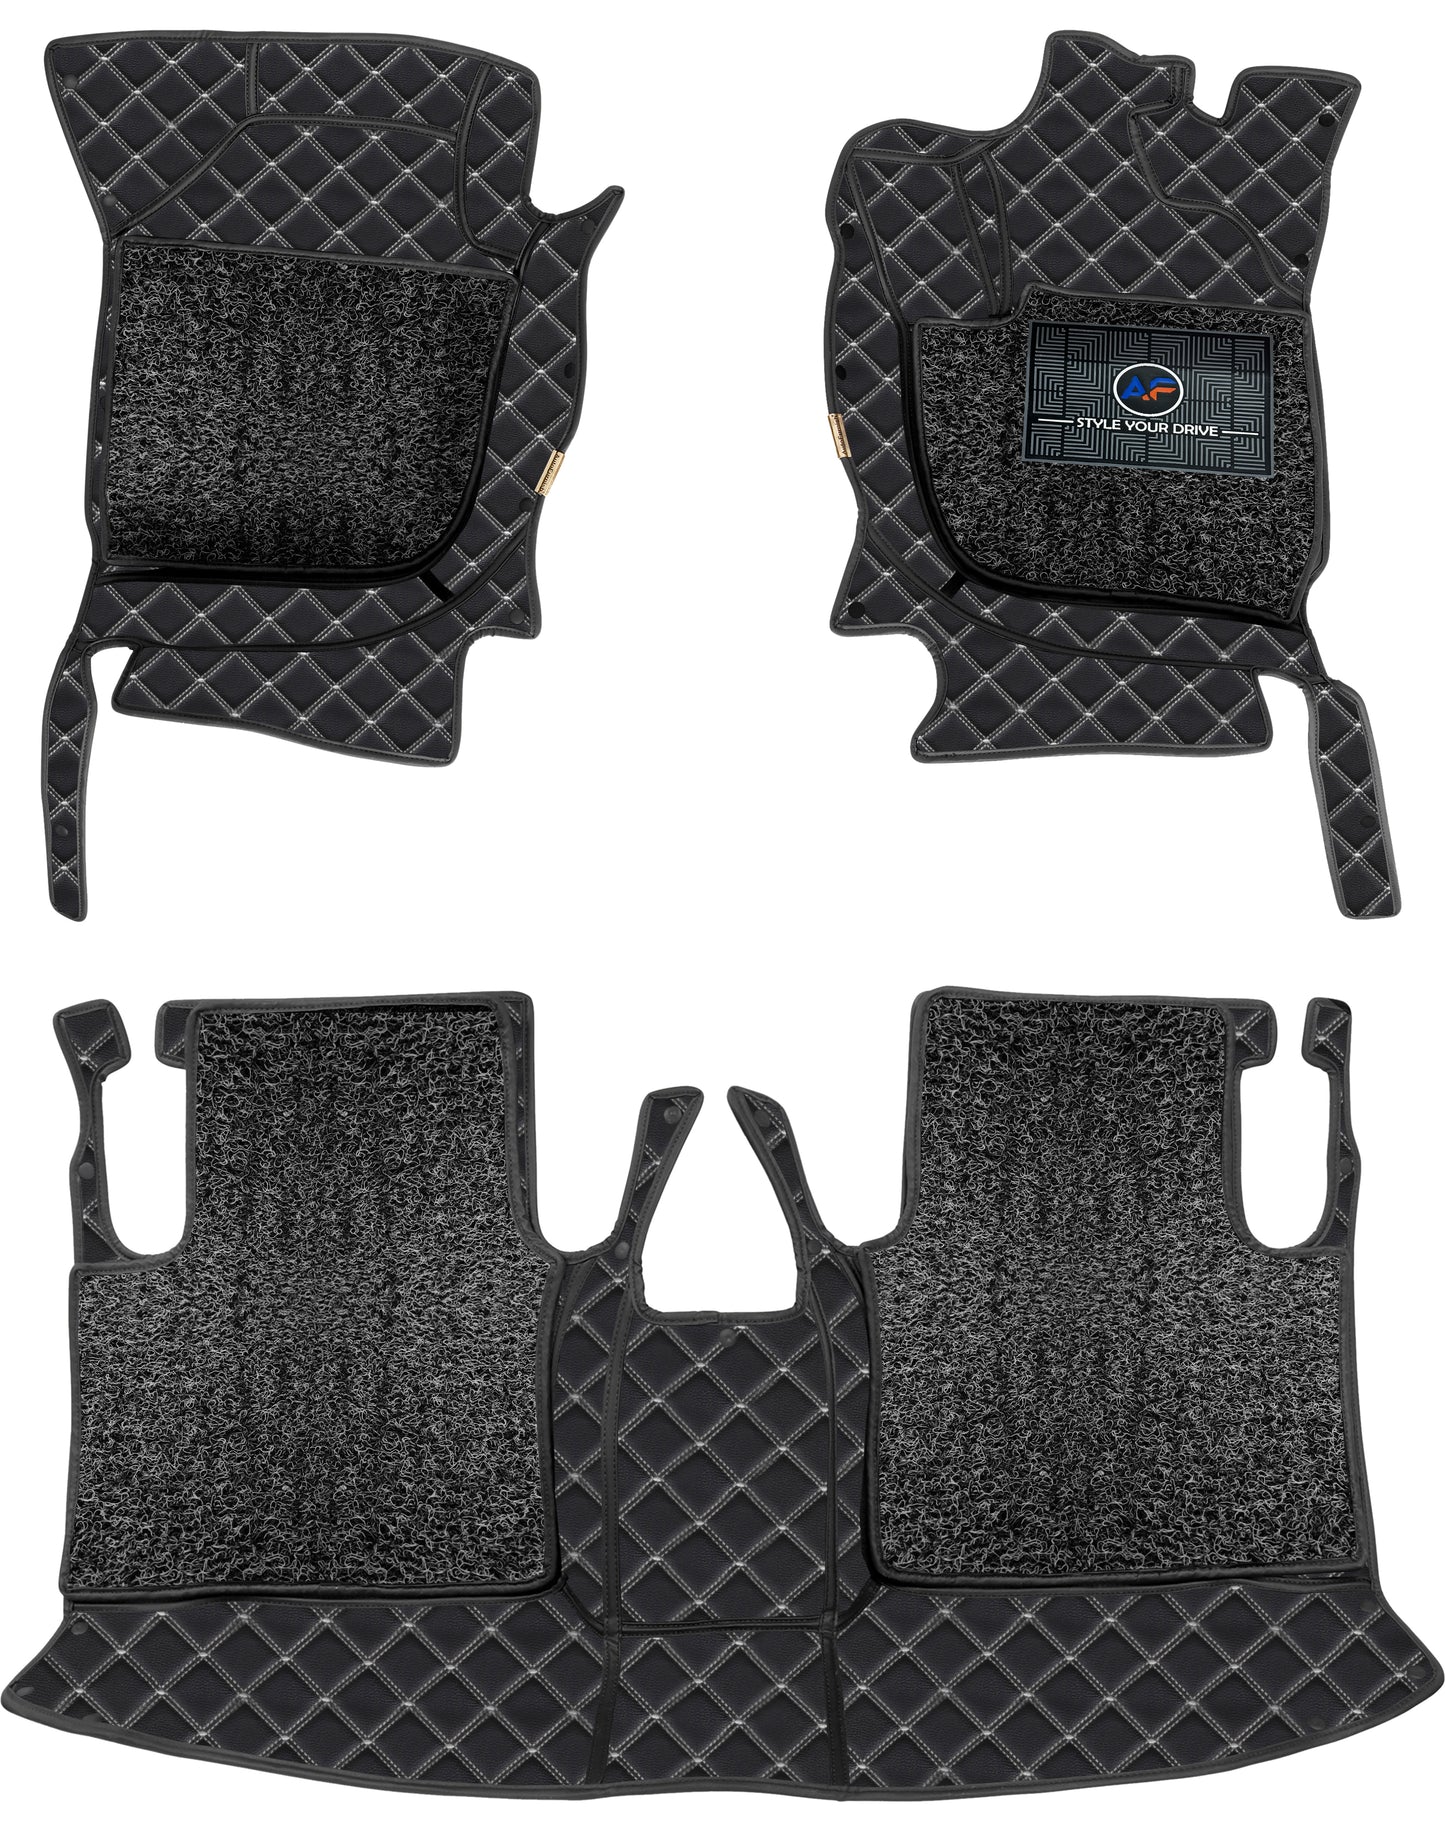 Hyundai Verna 2021-22-7D Luxury Car Mat, All Weather Proof, Anti-Skid, 100% Waterproof & Odorless with Unique Diamond Fish Design (24mm Luxury PU Leather, 2 Rows)